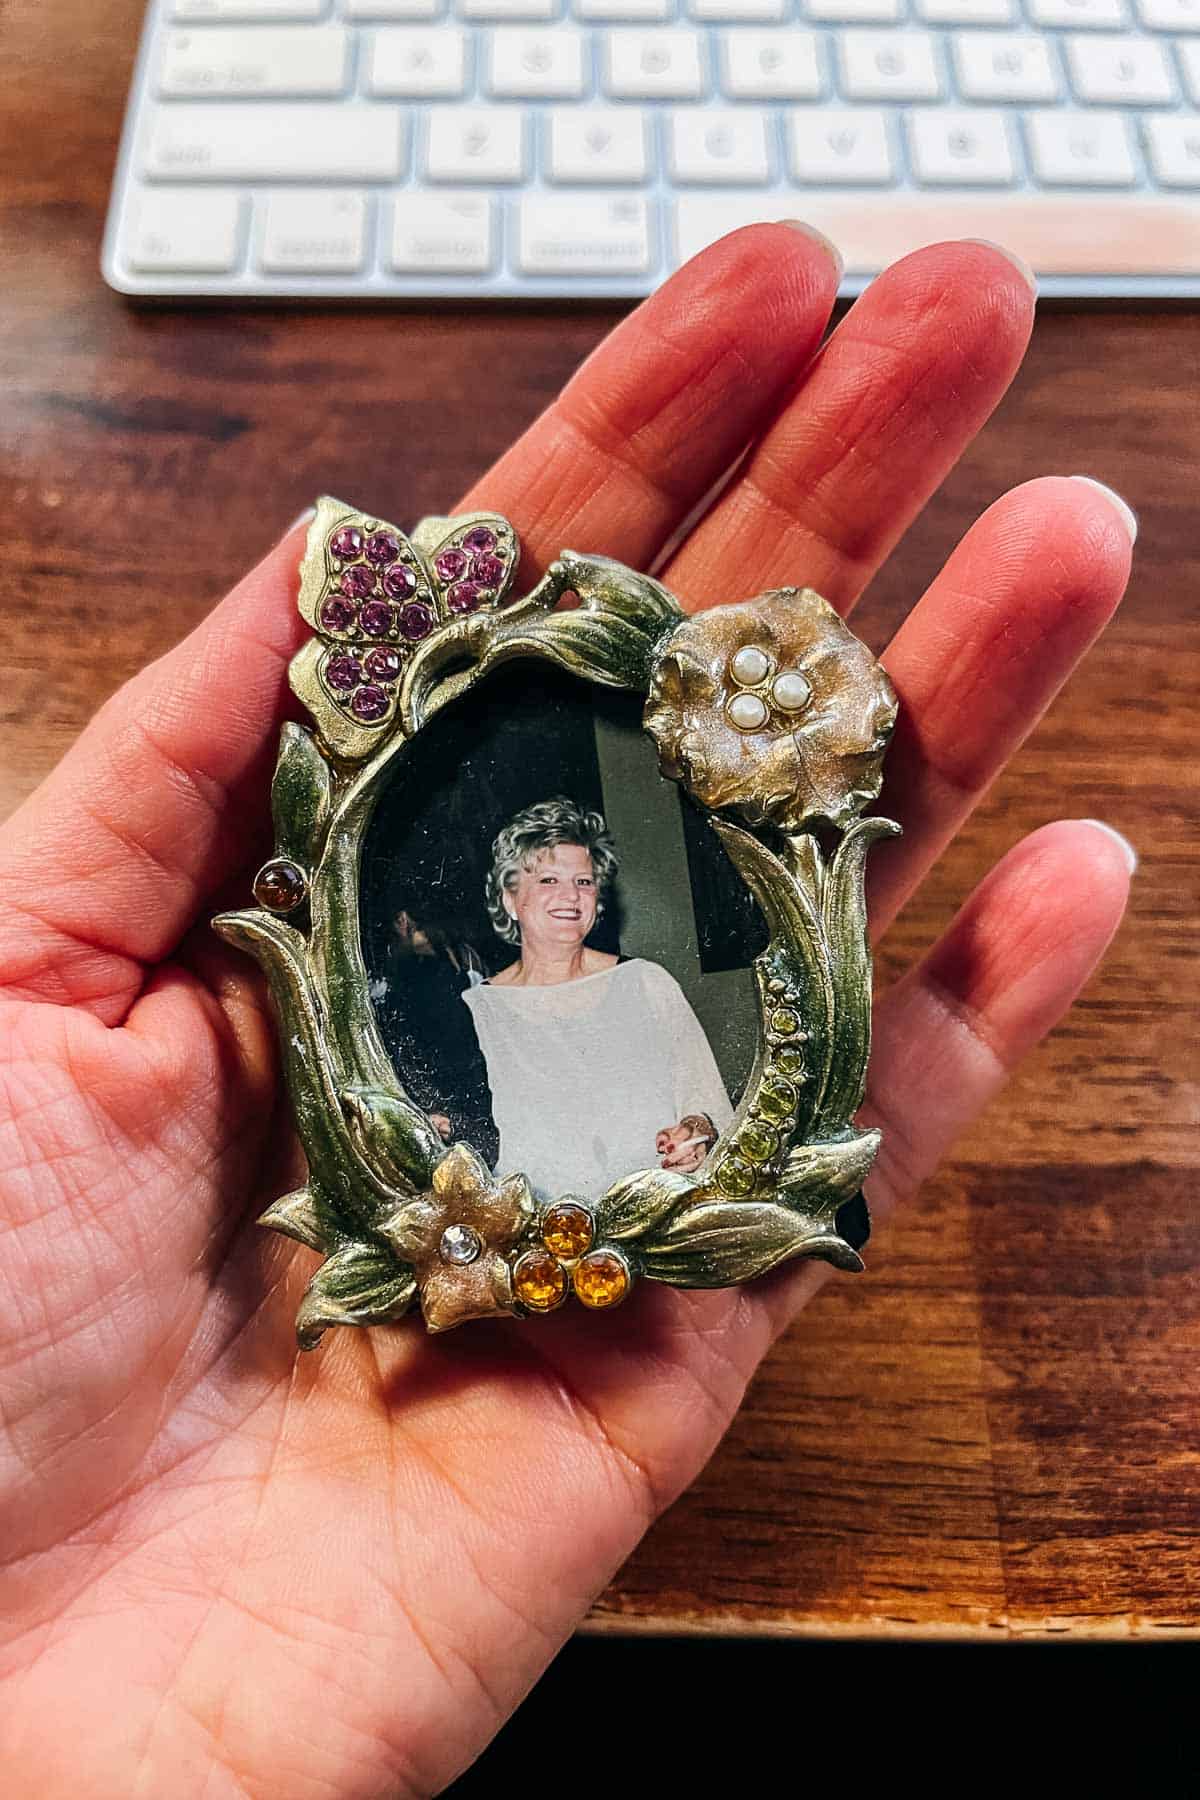 A photo frame in a woman's hand.